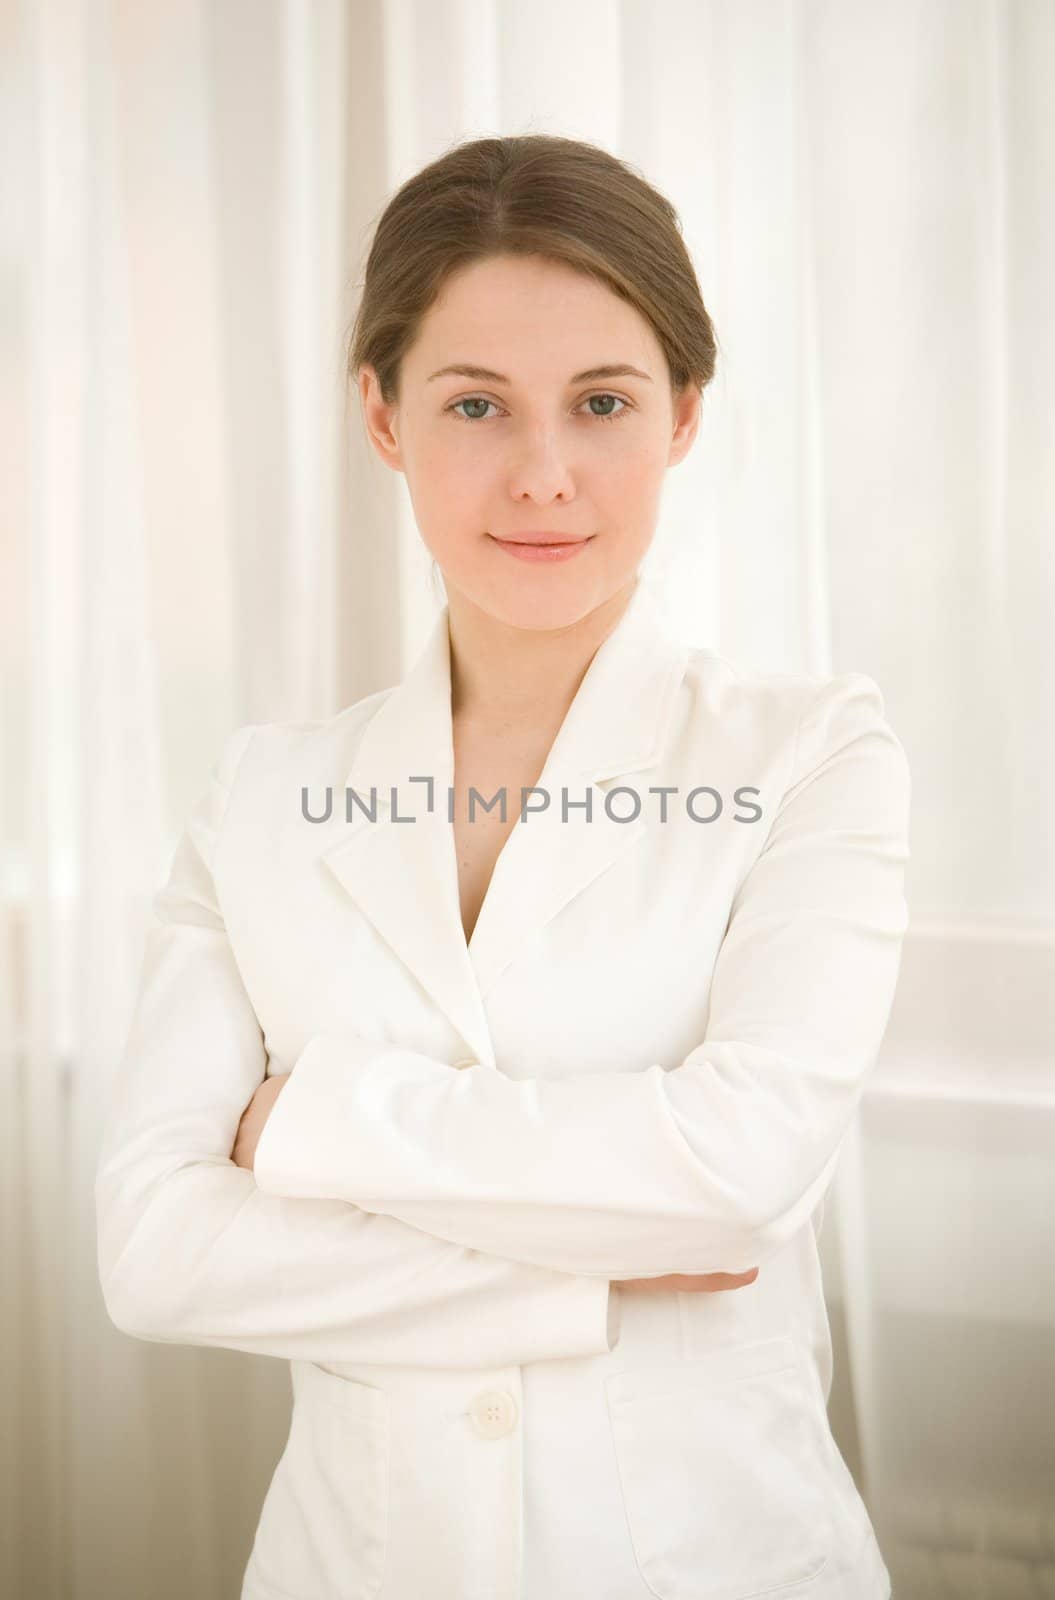 The business woman in a white jacket with dark hair near a window
